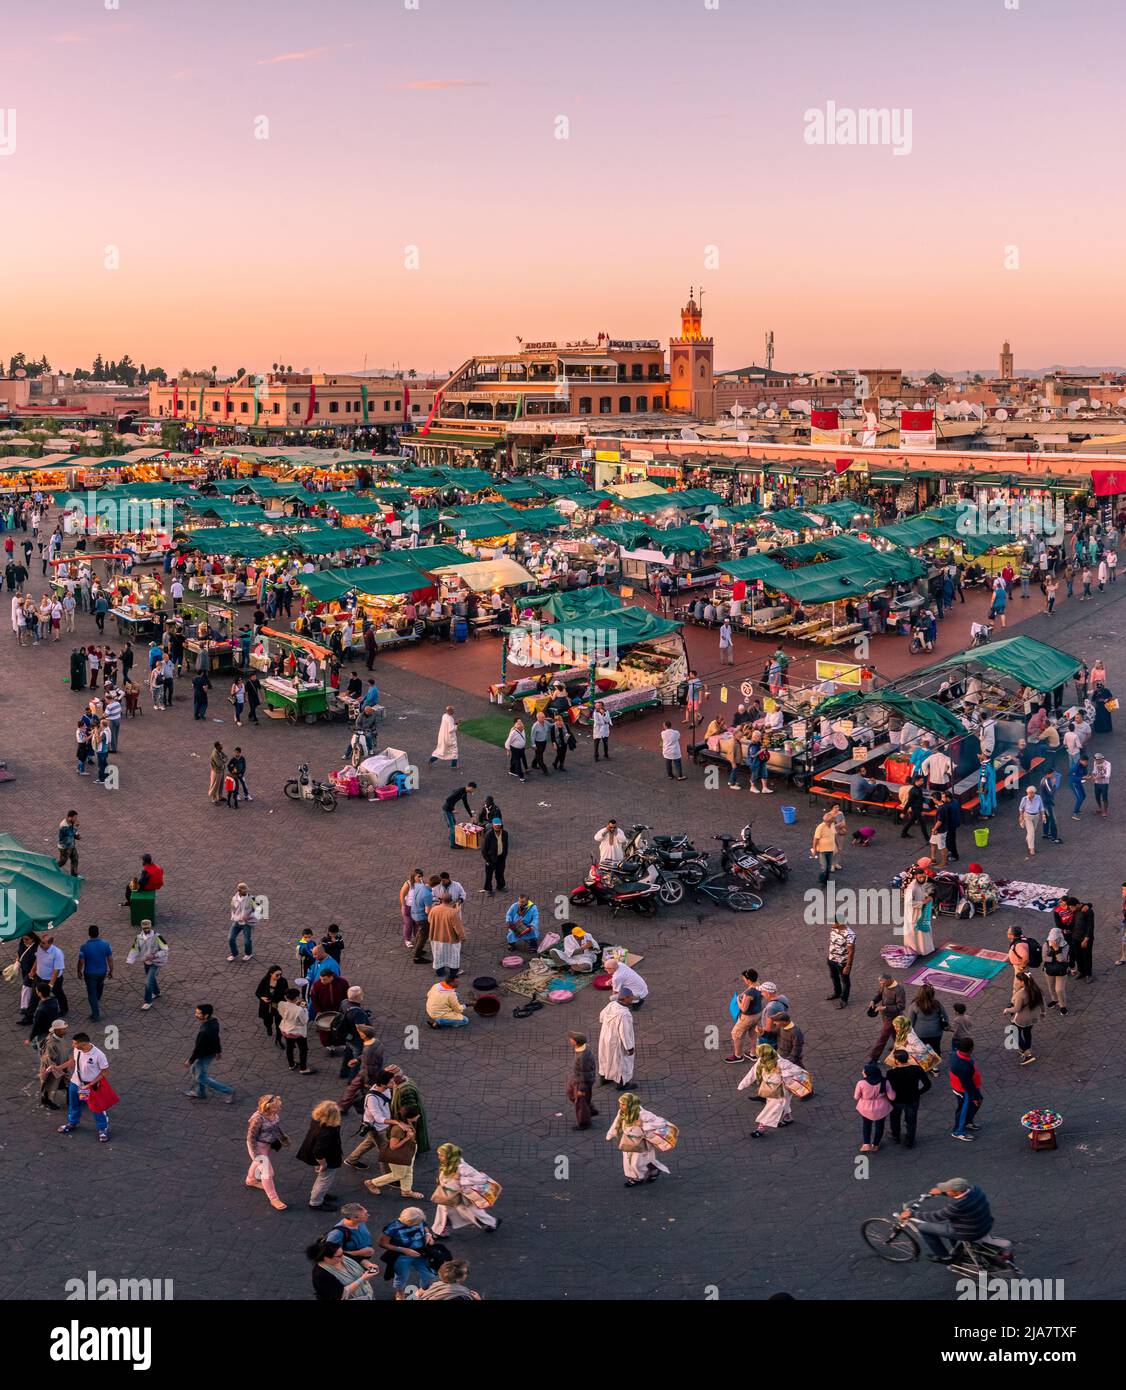 Marrakesh, Morocco, Africa - November 9, 2017: Aerial view of Marrakesh City and people downtown enjoying the market Stock Photo